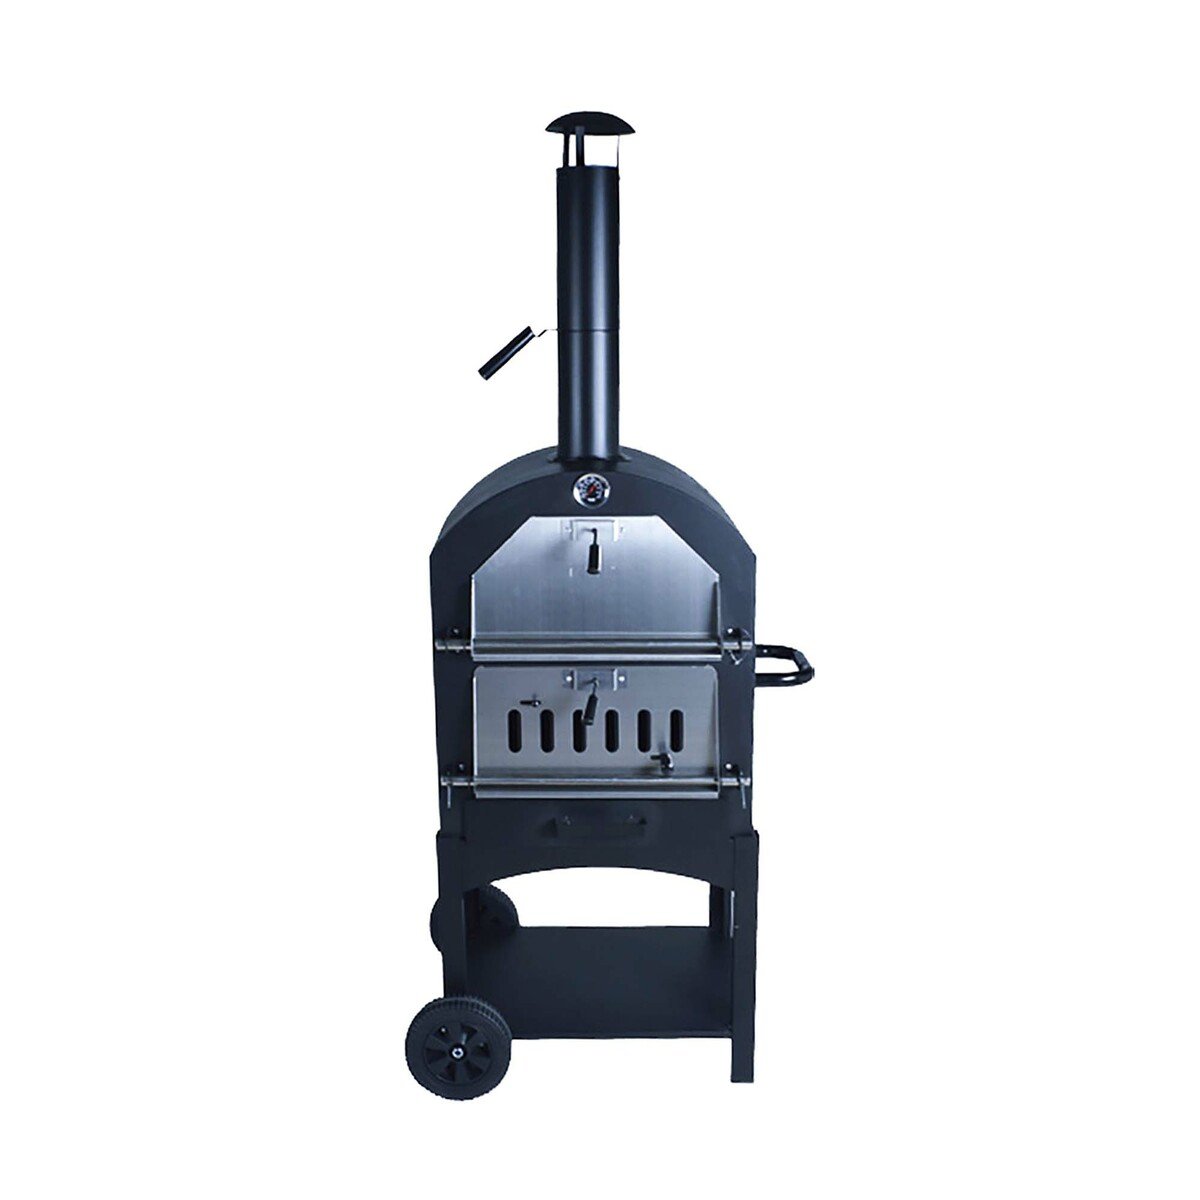 Relax BBQ Charcoal/ Pizza Grill KY-2526 104cm